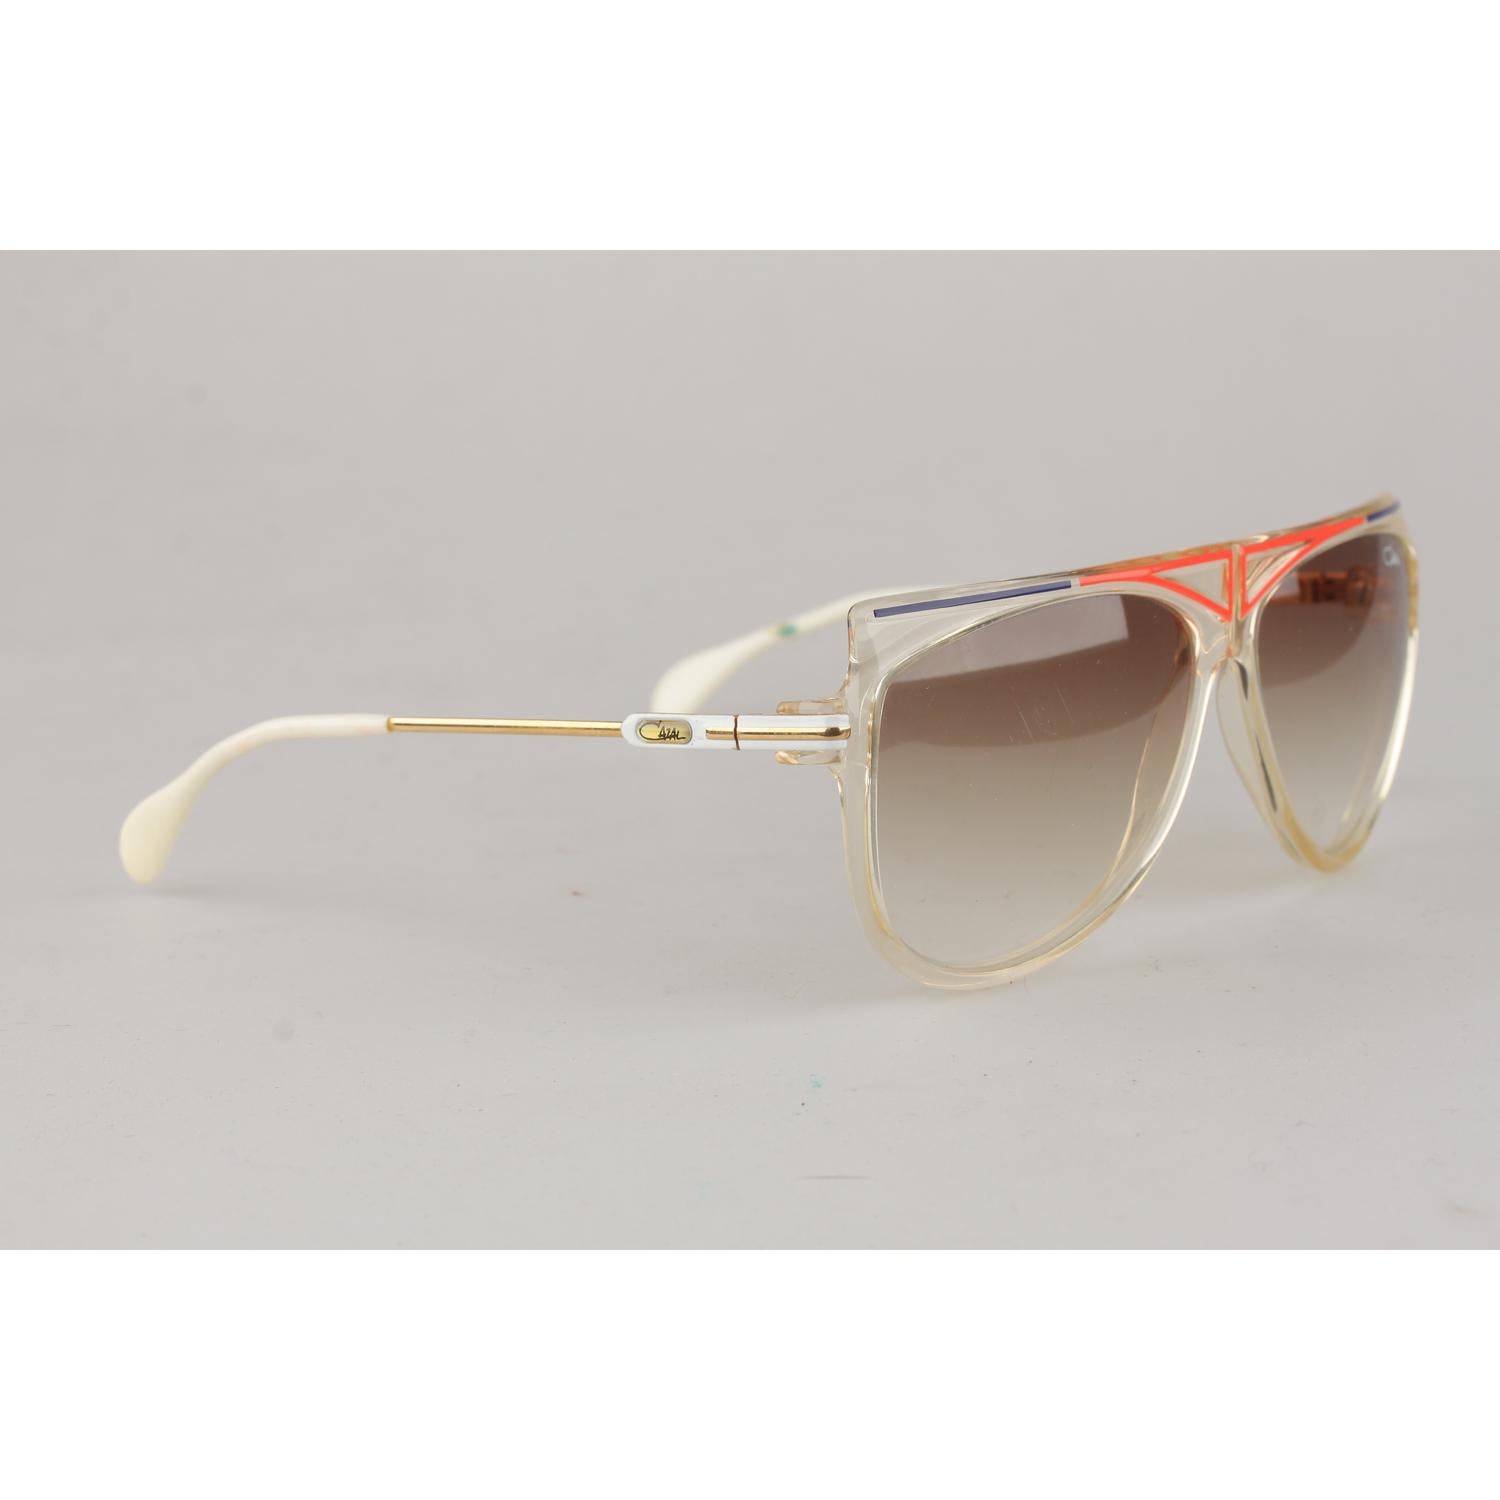 CAZAL Rare squared style vintage sunglasses from the end of the 1970s, Made in West Germany - Acetate semi transparent frame, with red and blue finish on the front. Original Cazal gradient light brown lenses. Black and yellow Cazal classic logo on